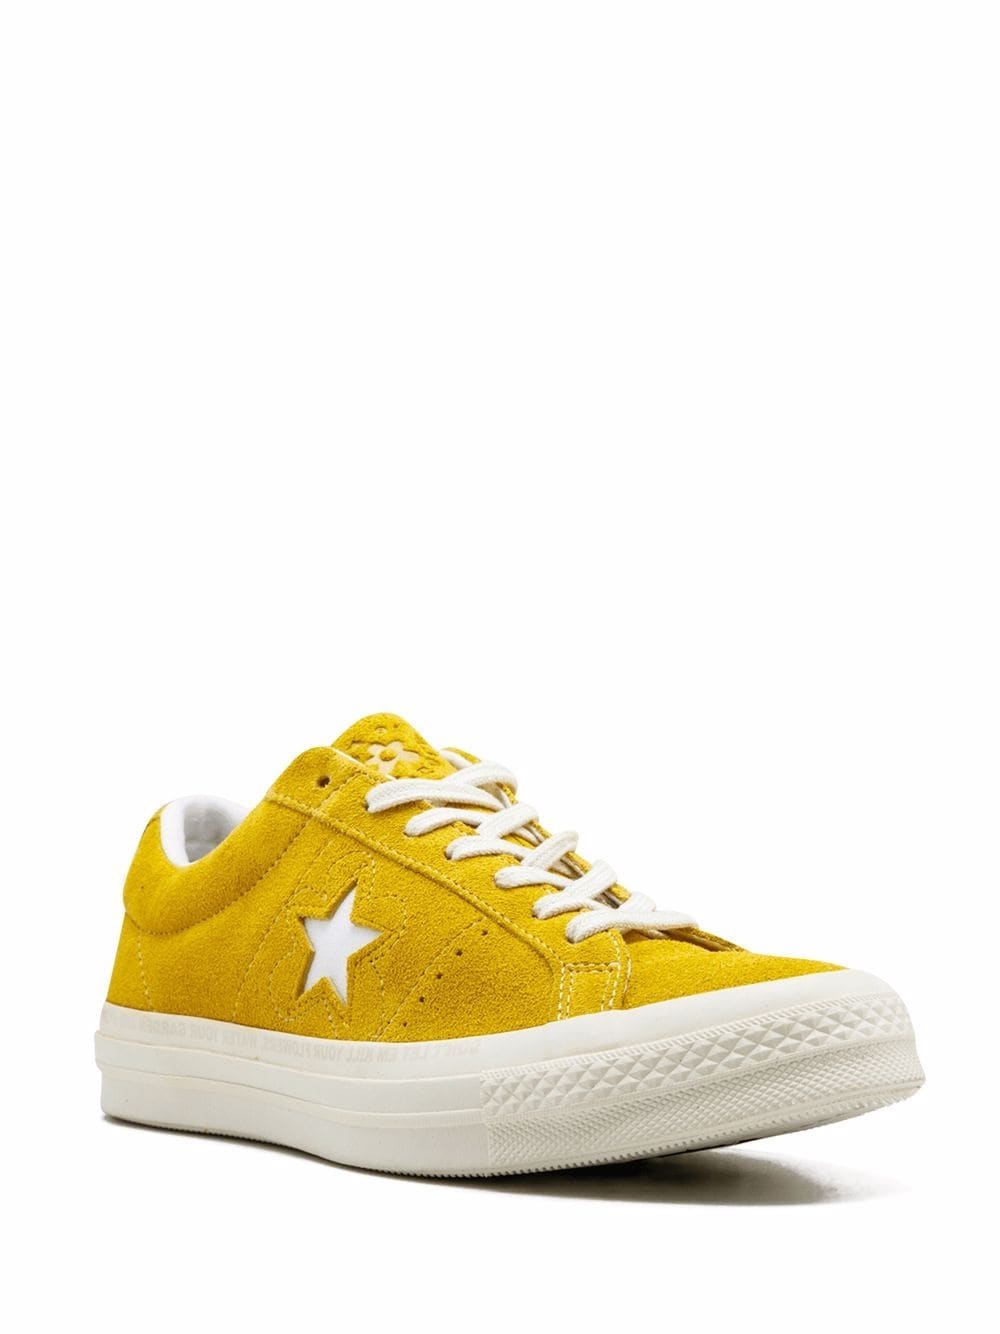 Converse x Tyler, the Creator: Where can I buy the shoes?